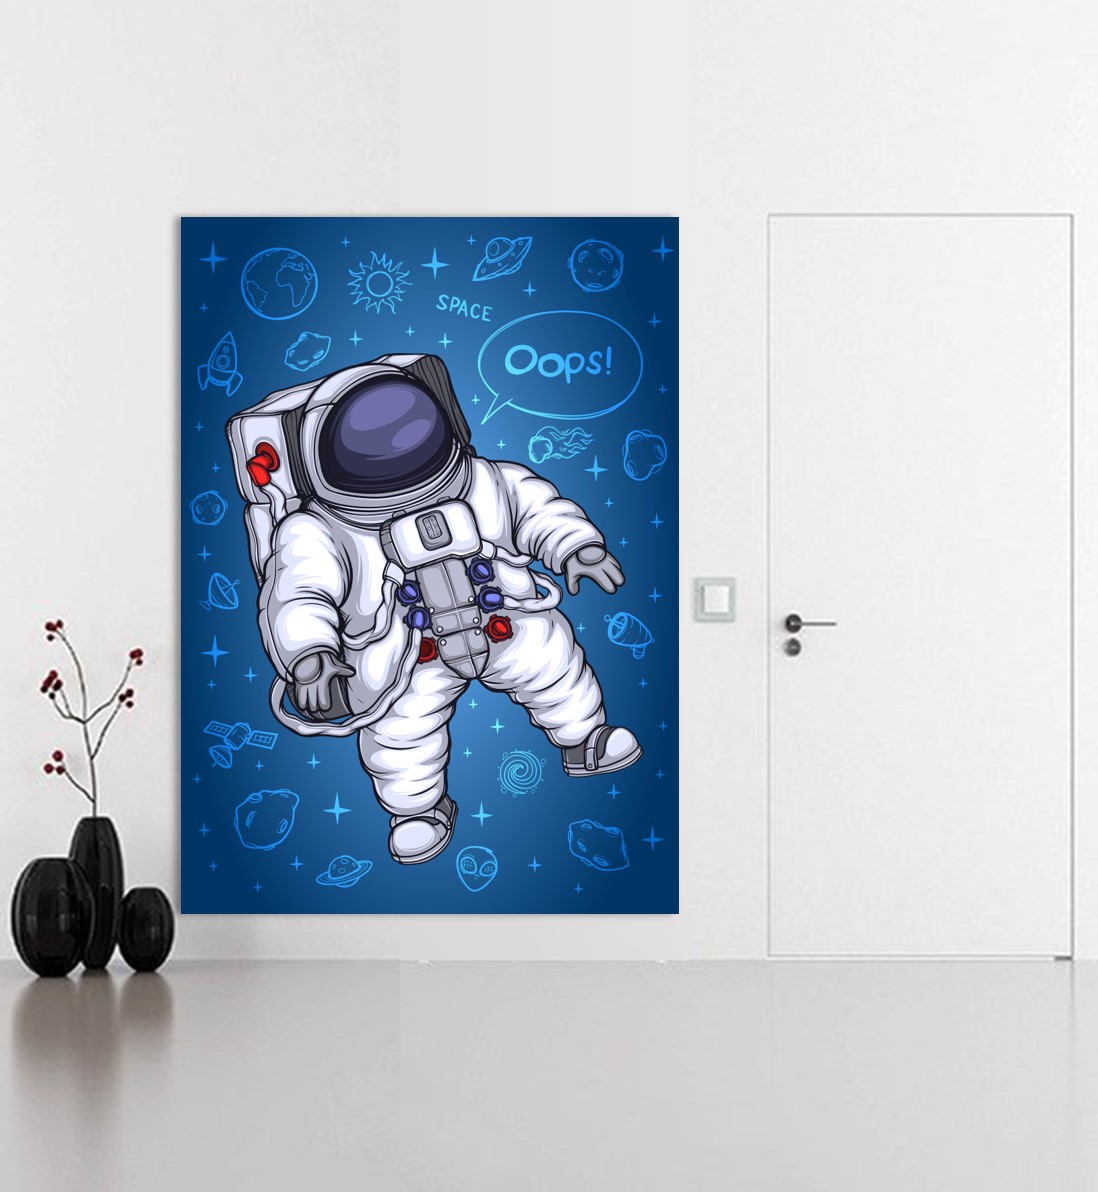 Astronot%20Poster%20P1